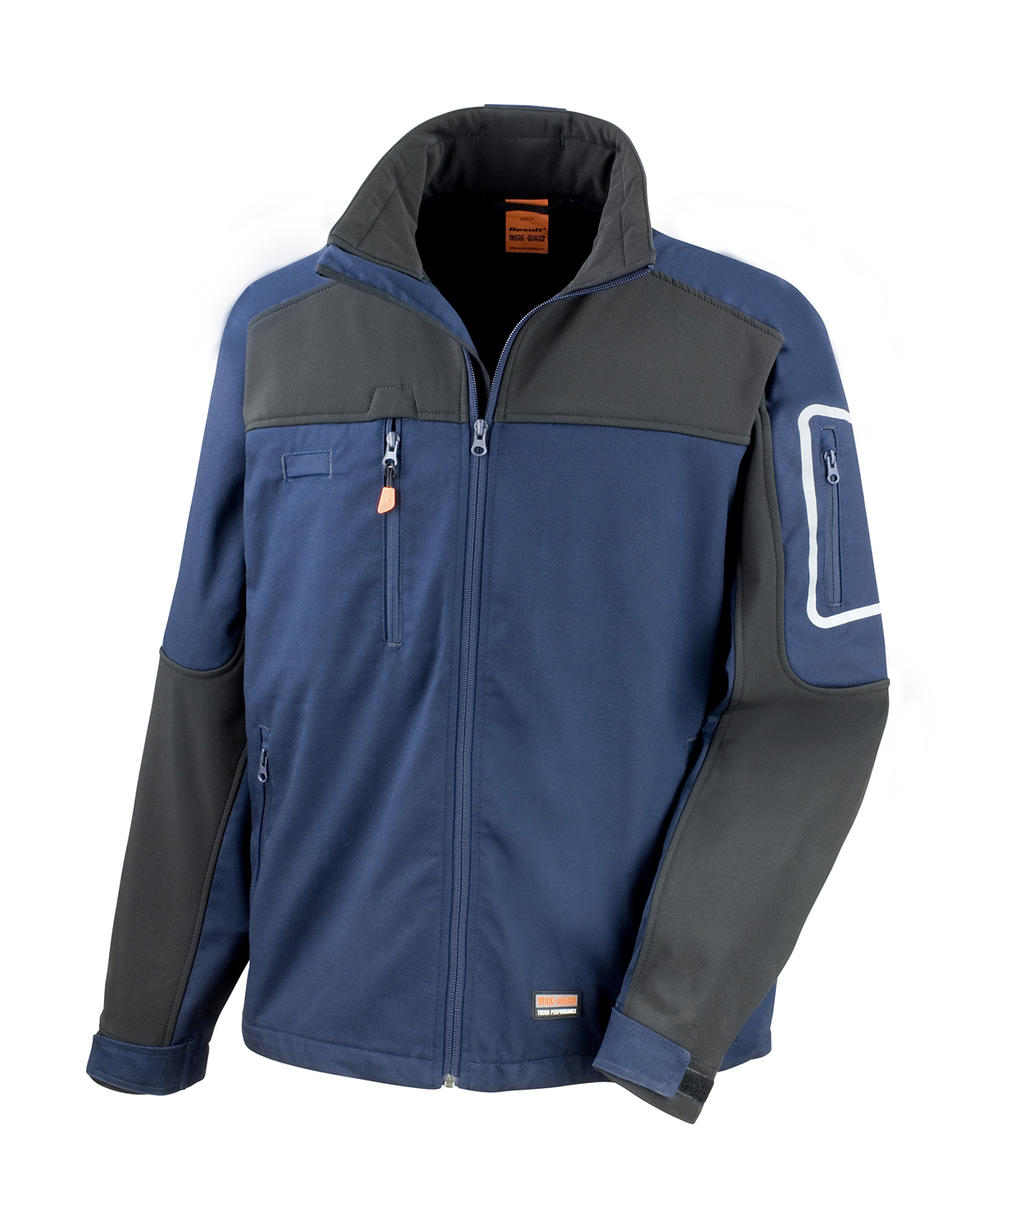  Work-Guard Sabre Stretch Jacket in Farbe Navy/Black